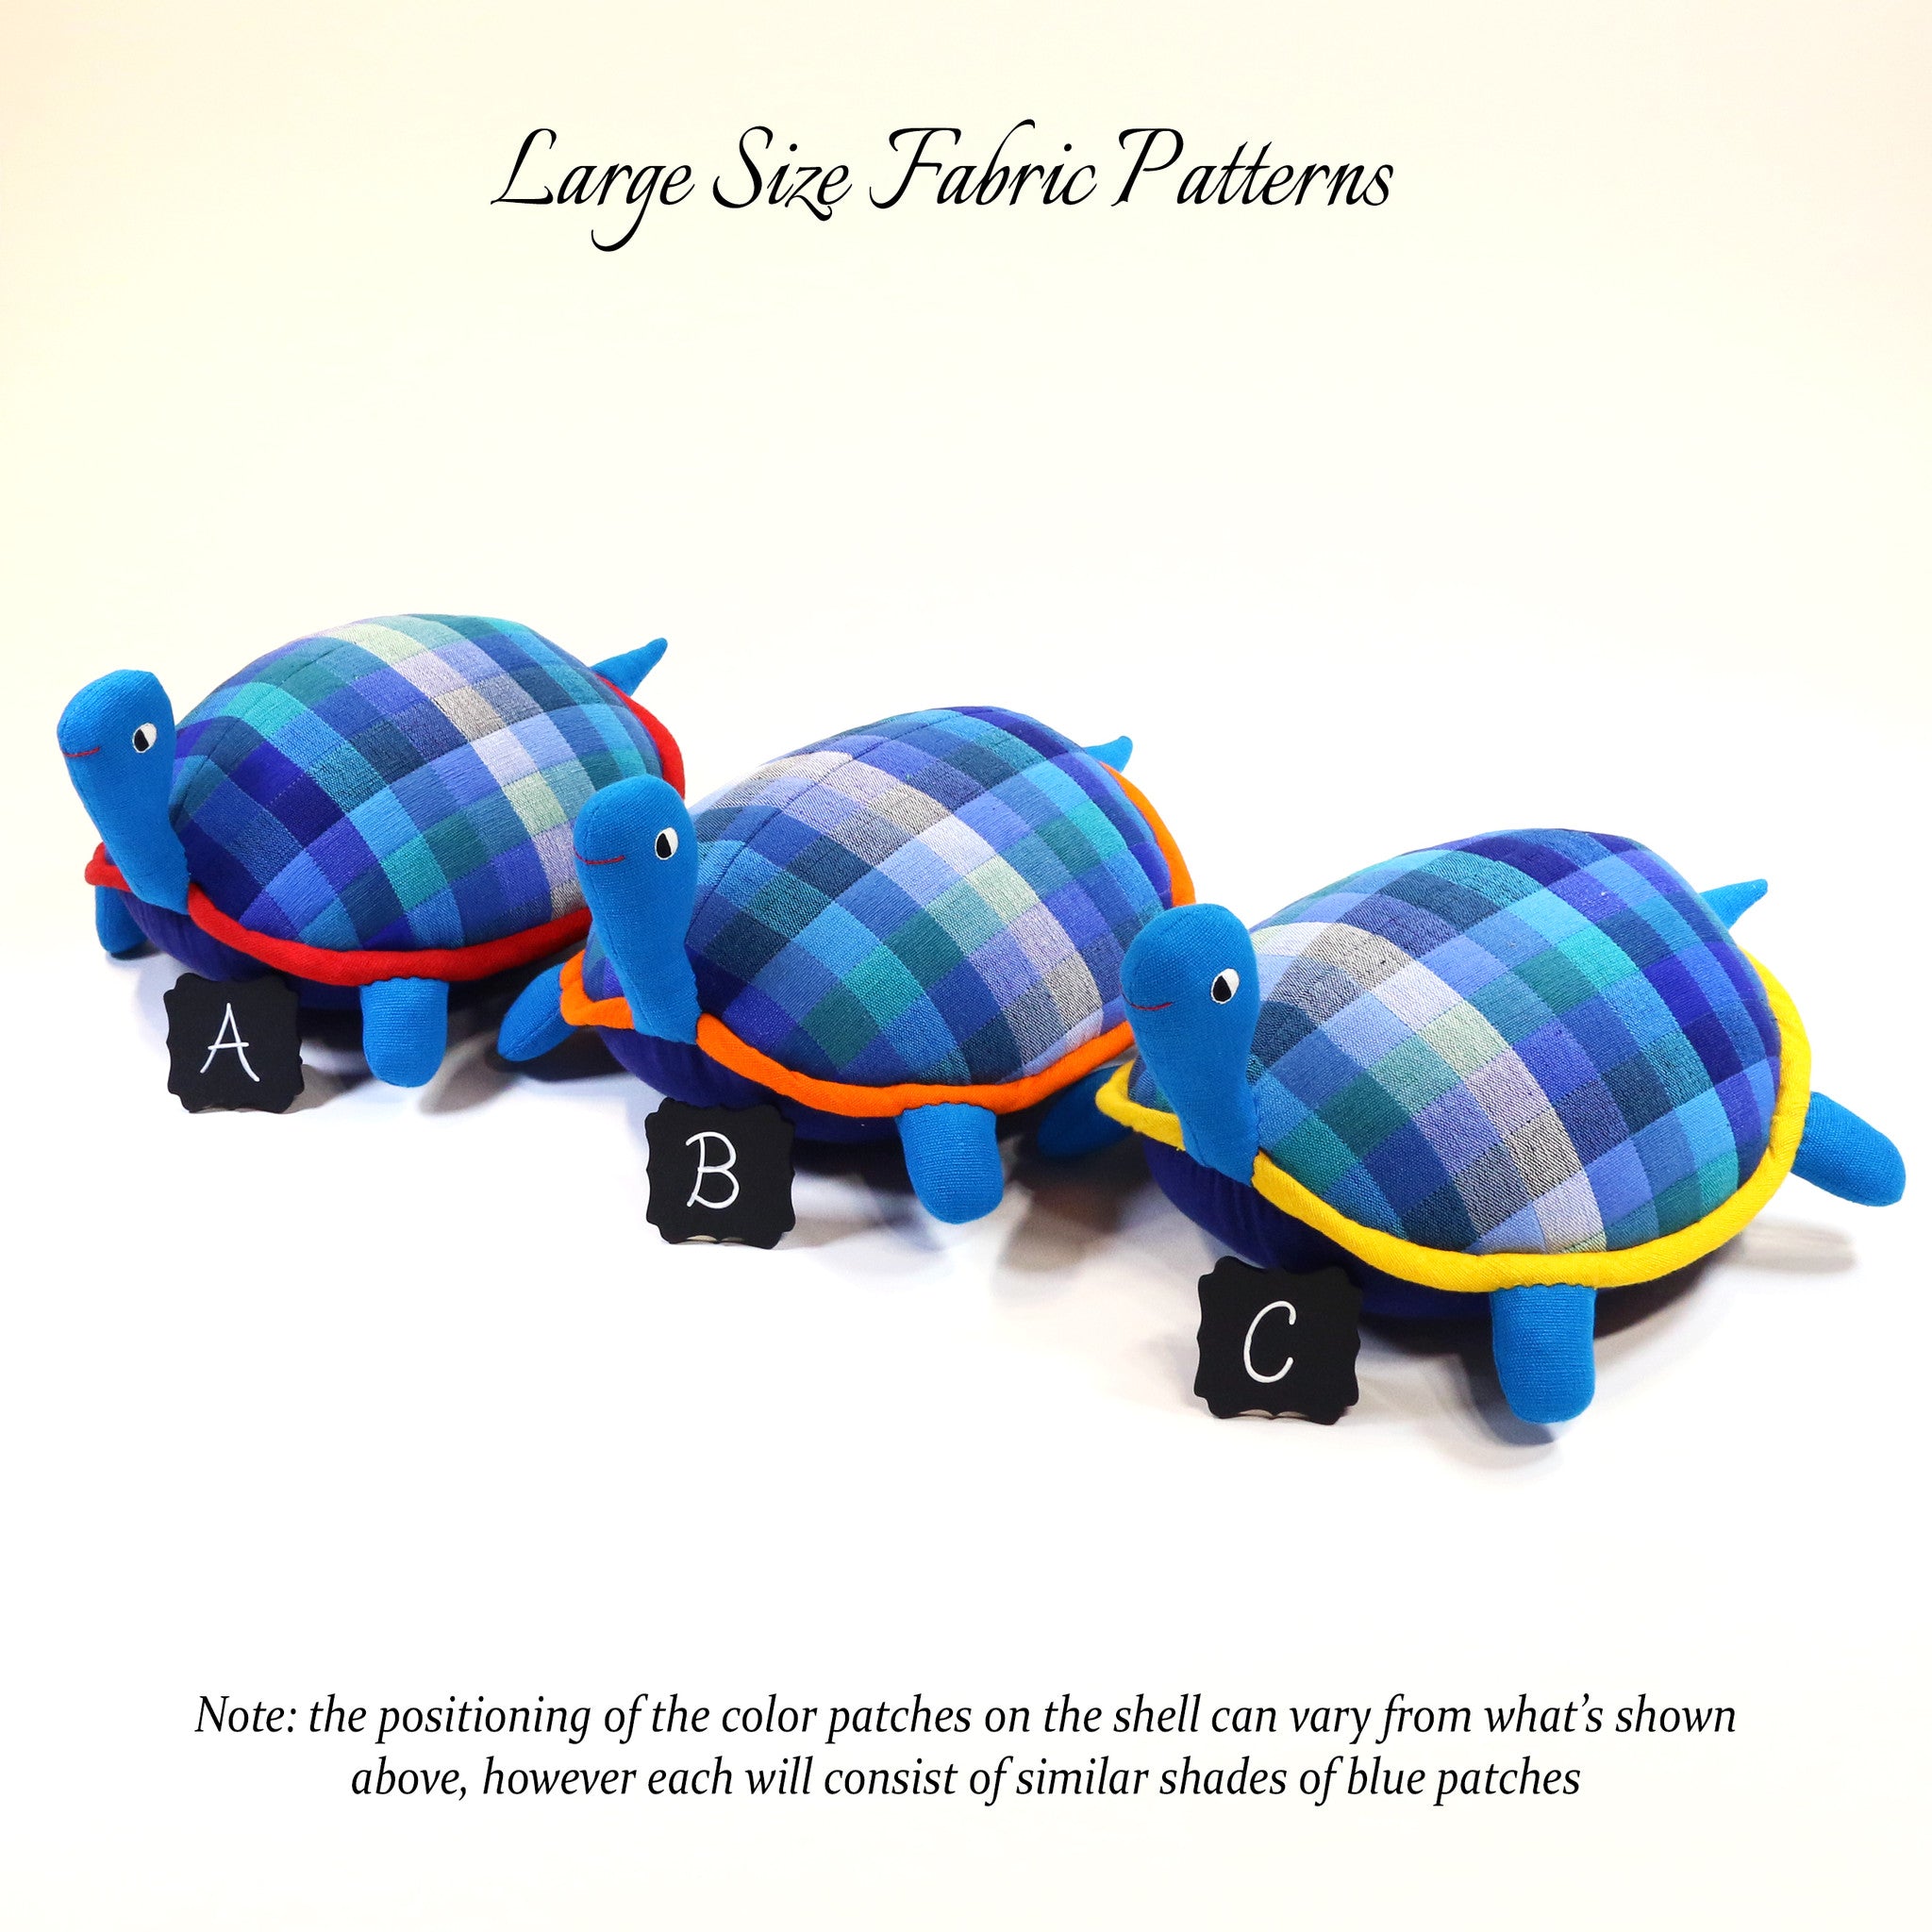 Tommy, the Turtle – all large size fabric patterns shown